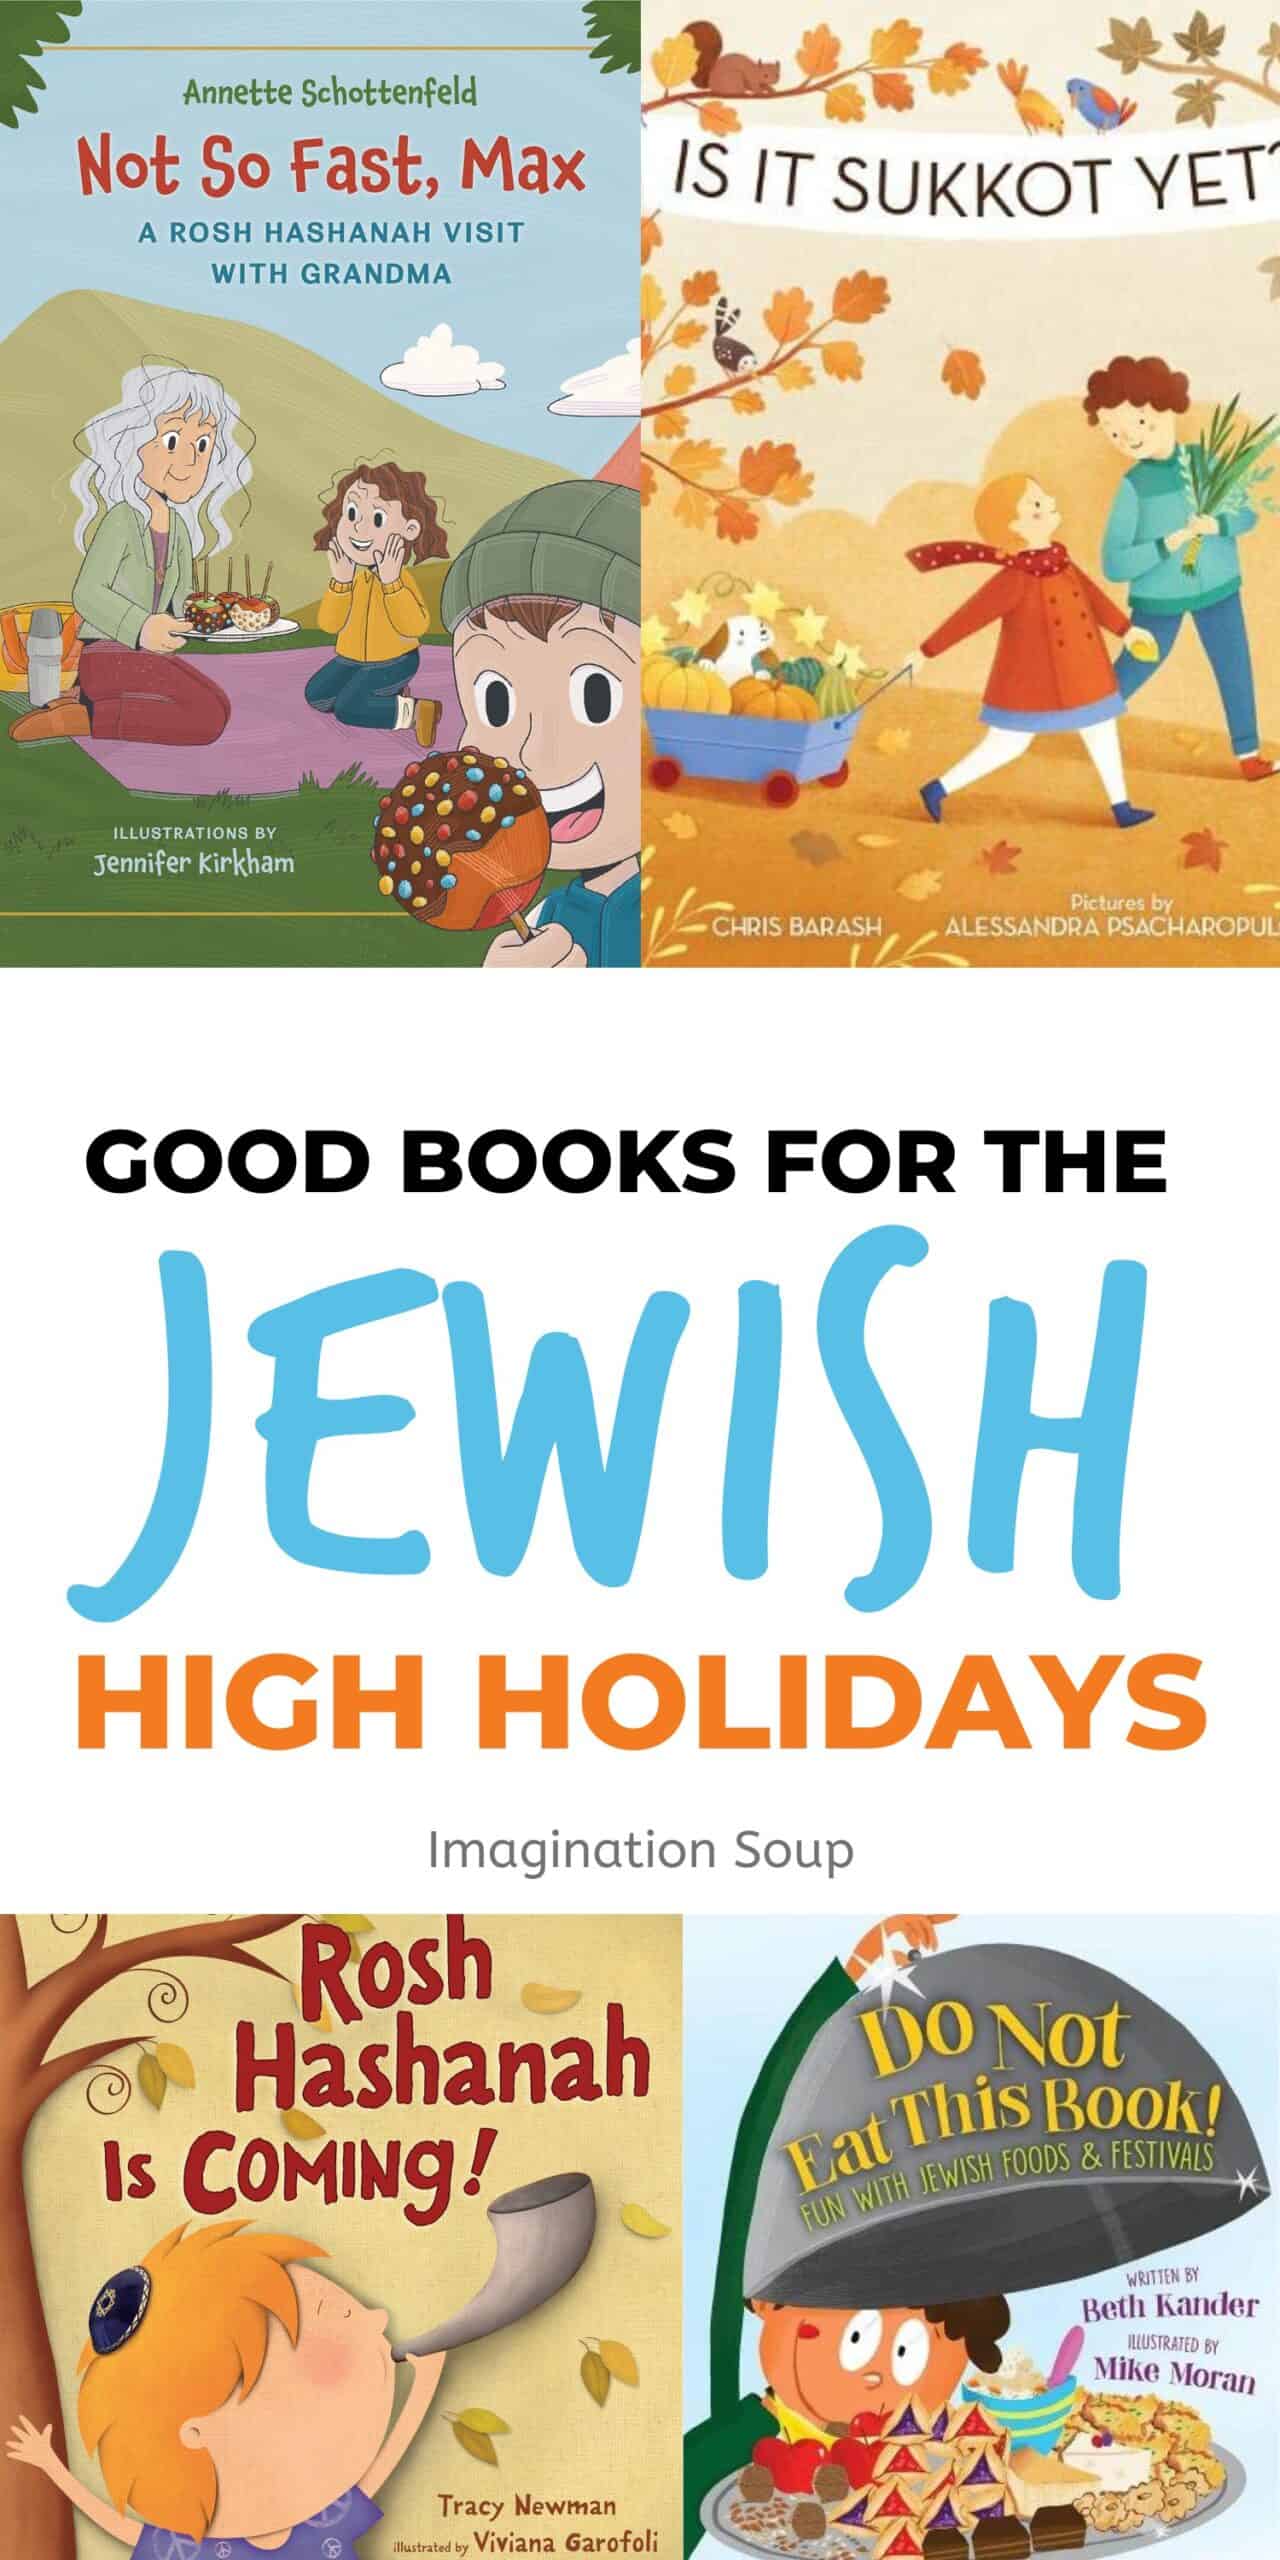 BOOKS FOR THE JEWISH HIGH HOLIDAYS